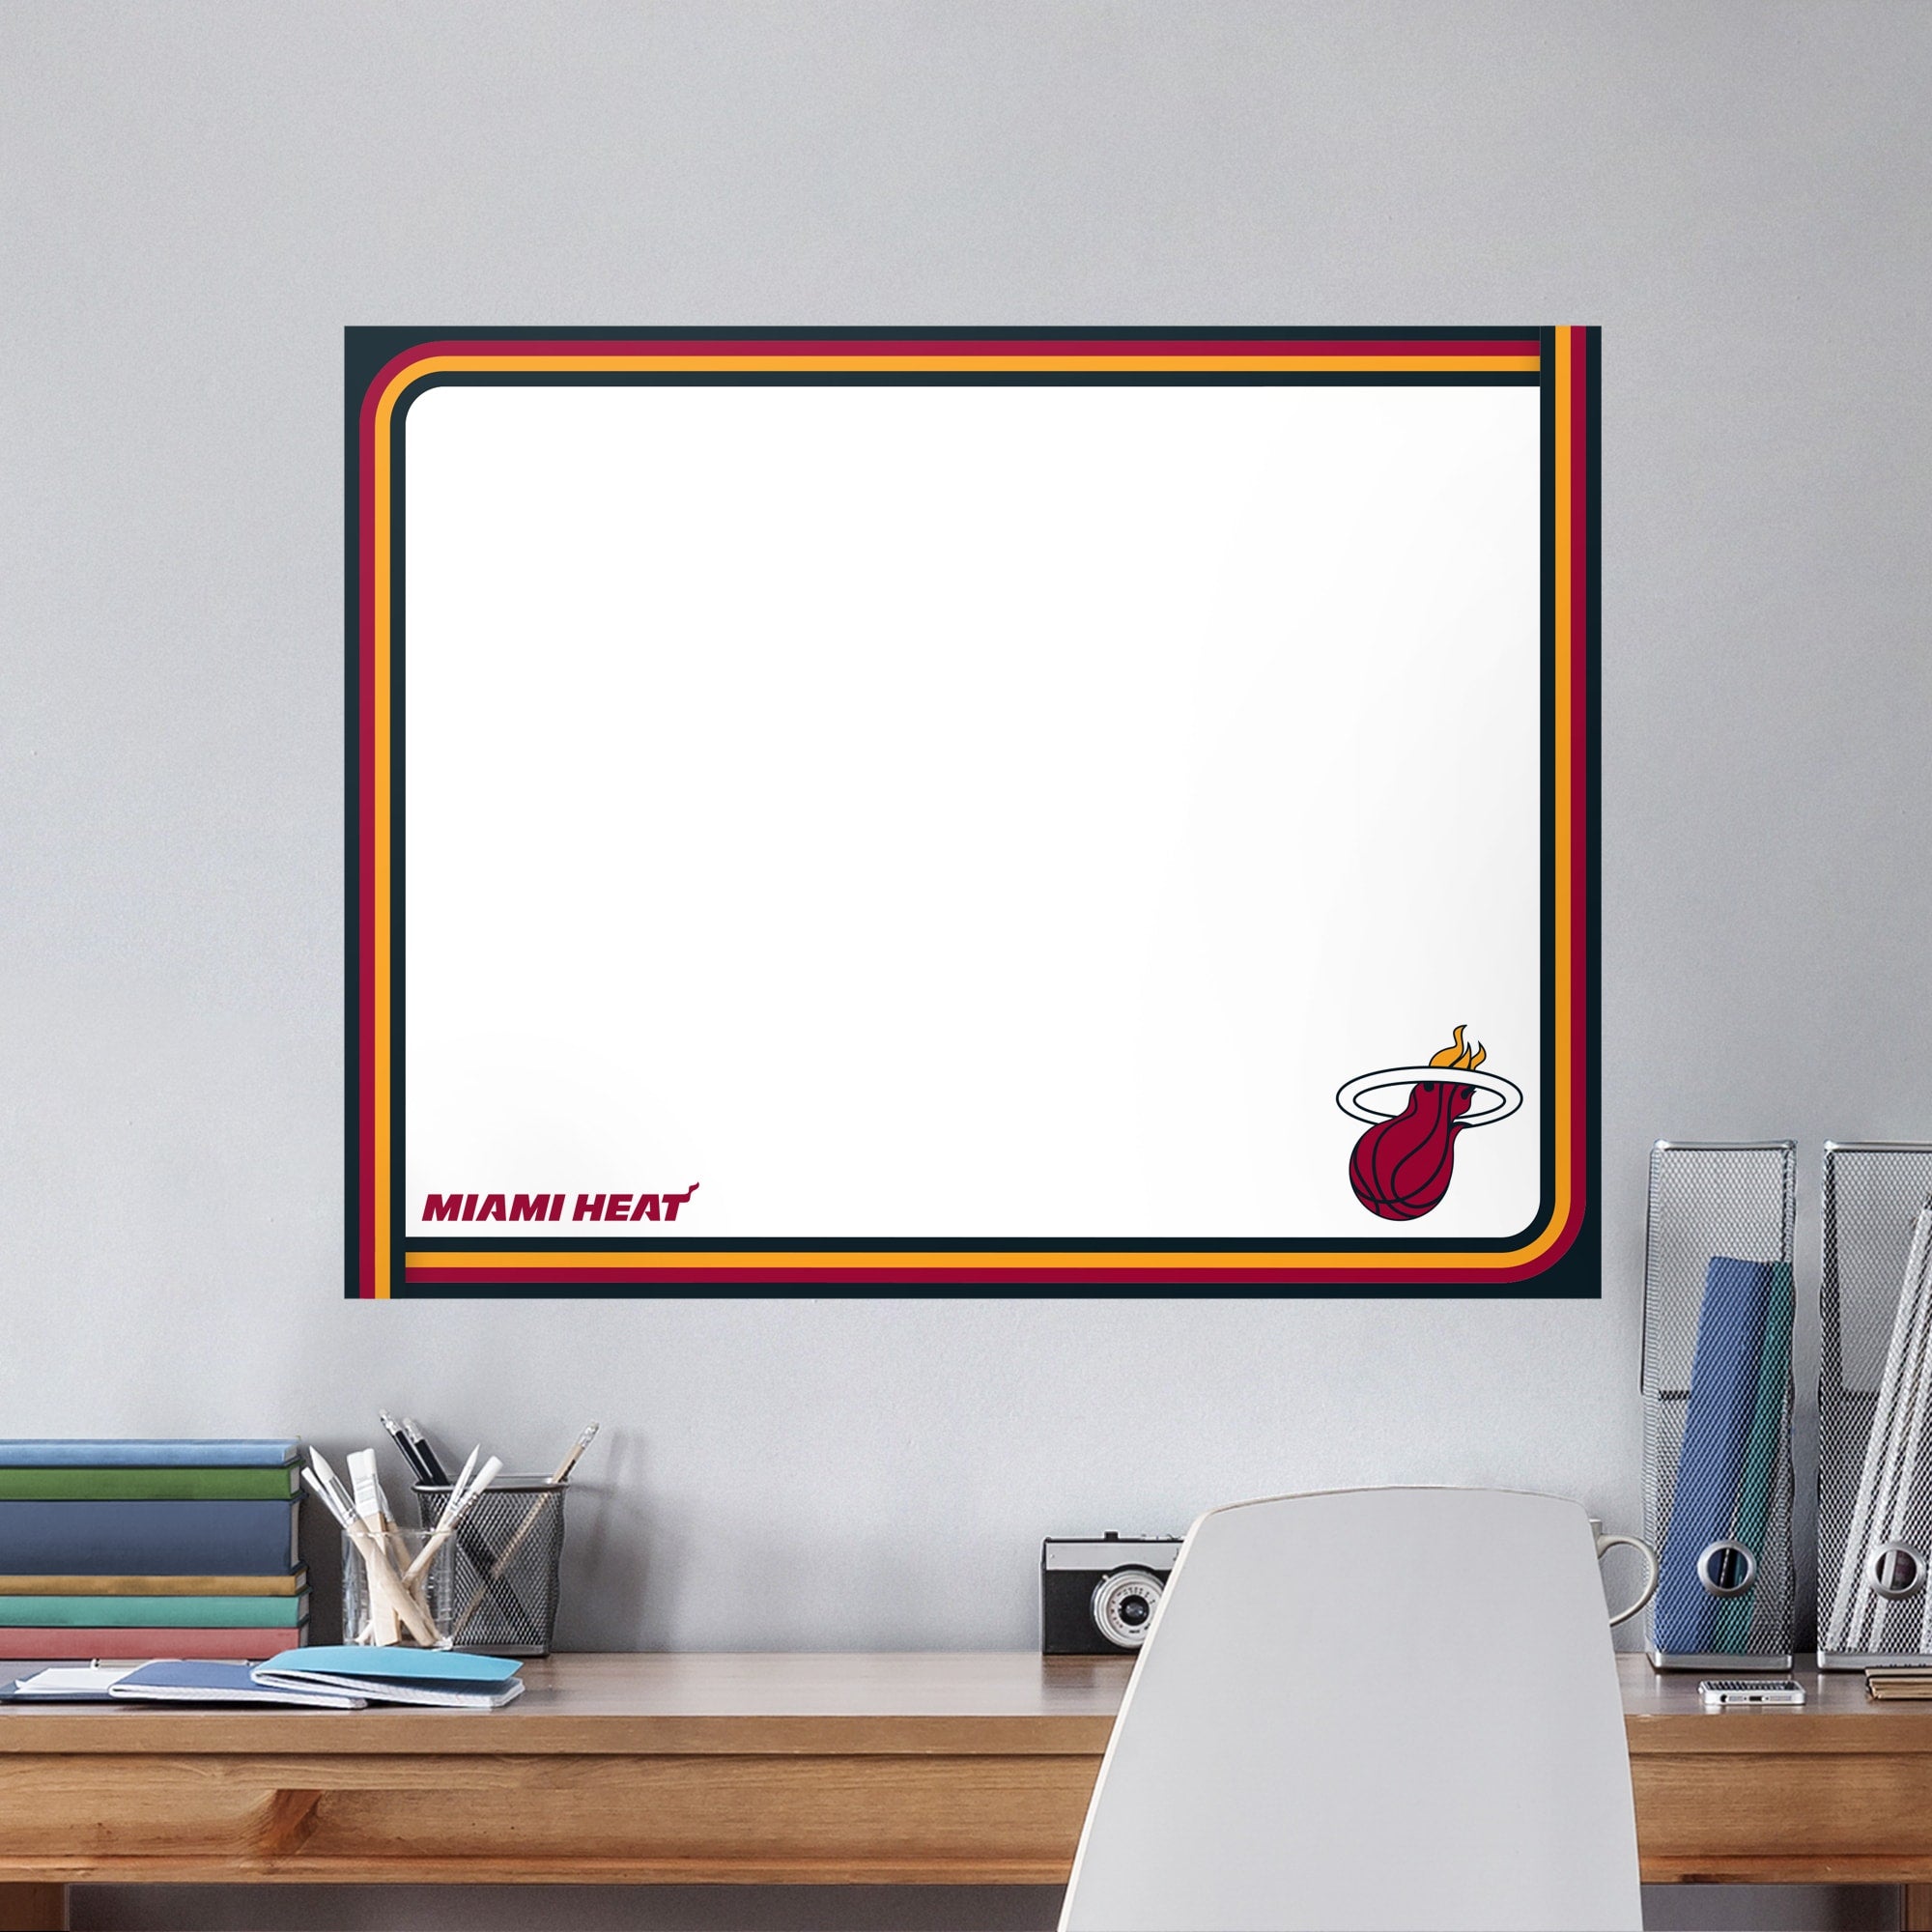 Miami Heat for Miami Heat: Dry Erase Whiteboard - Officially Licensed NBA Removable Wall Decal XL by Fathead | Vinyl